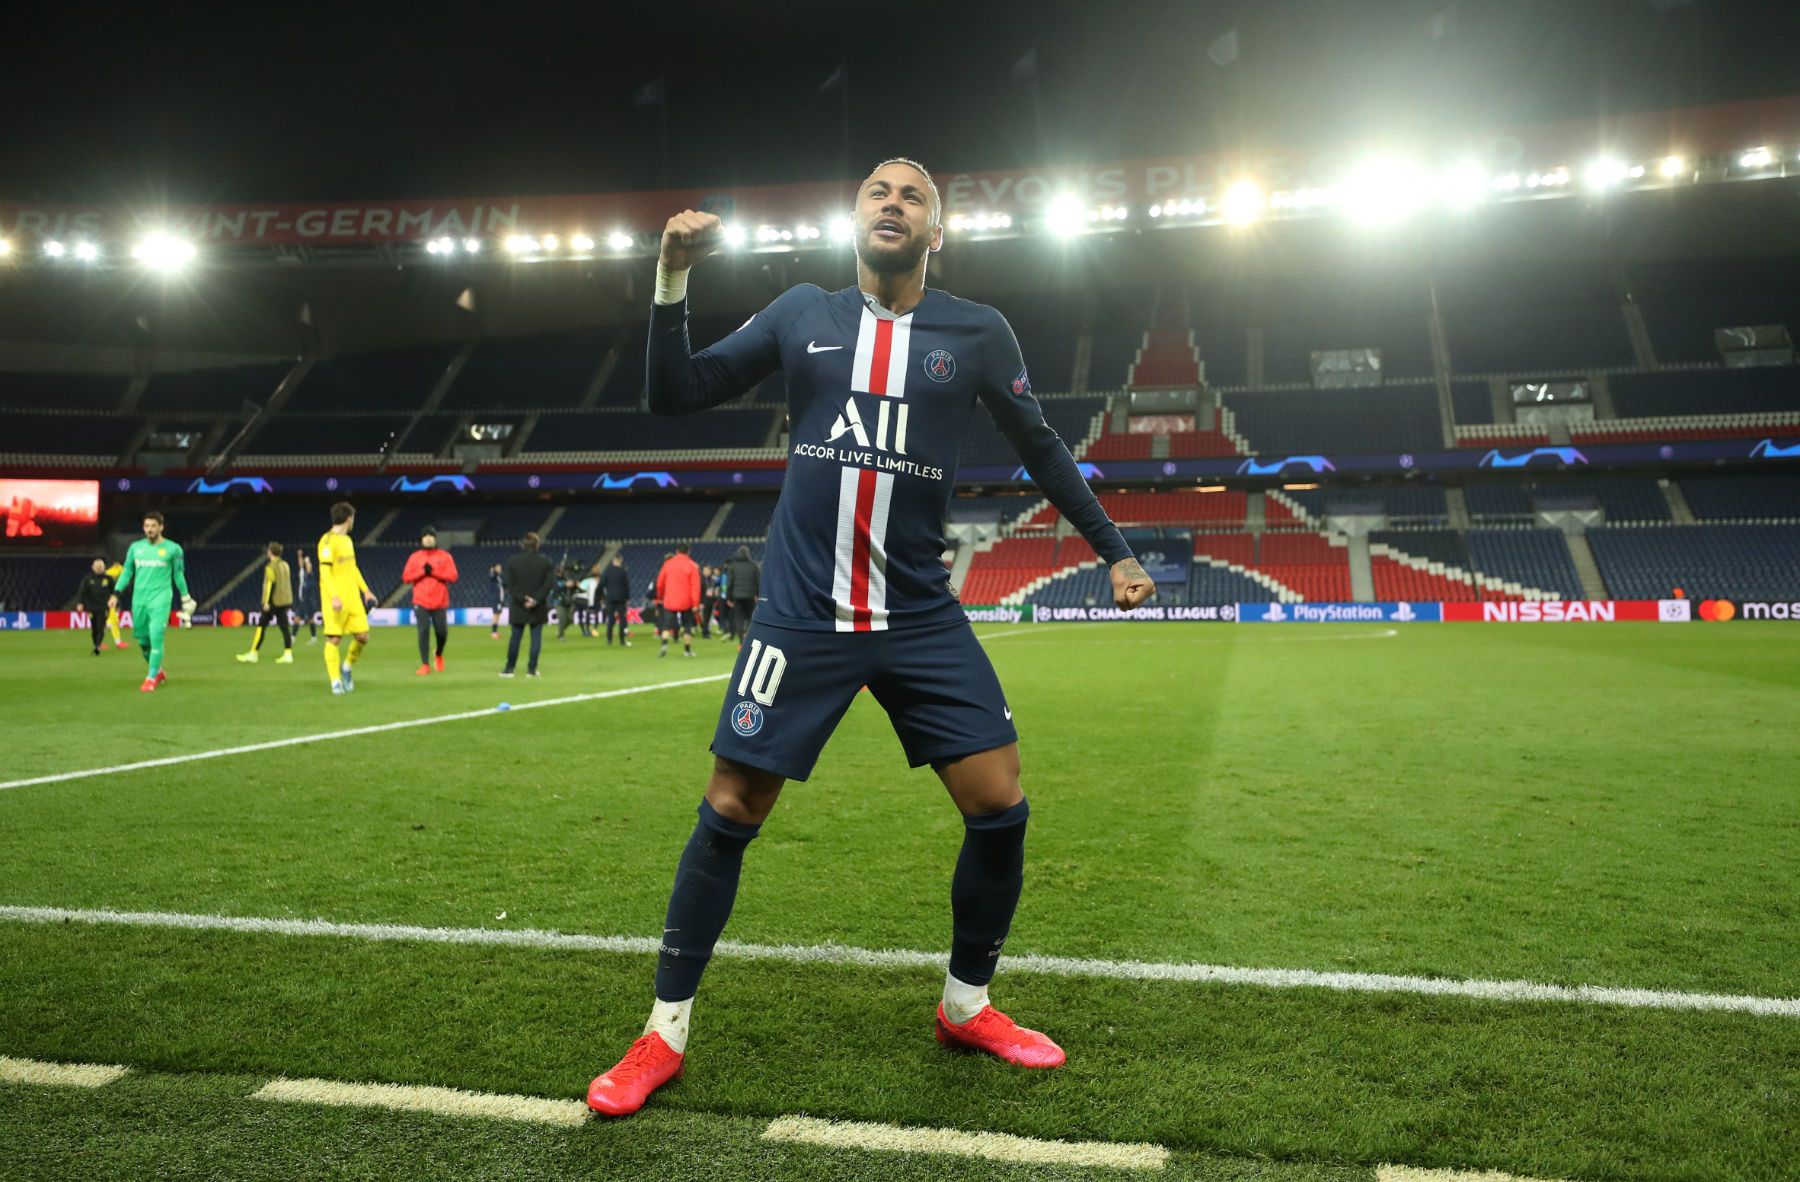 The Best Photo and Videos From PSG's Win Over Borussia Dortmund in the Champions League